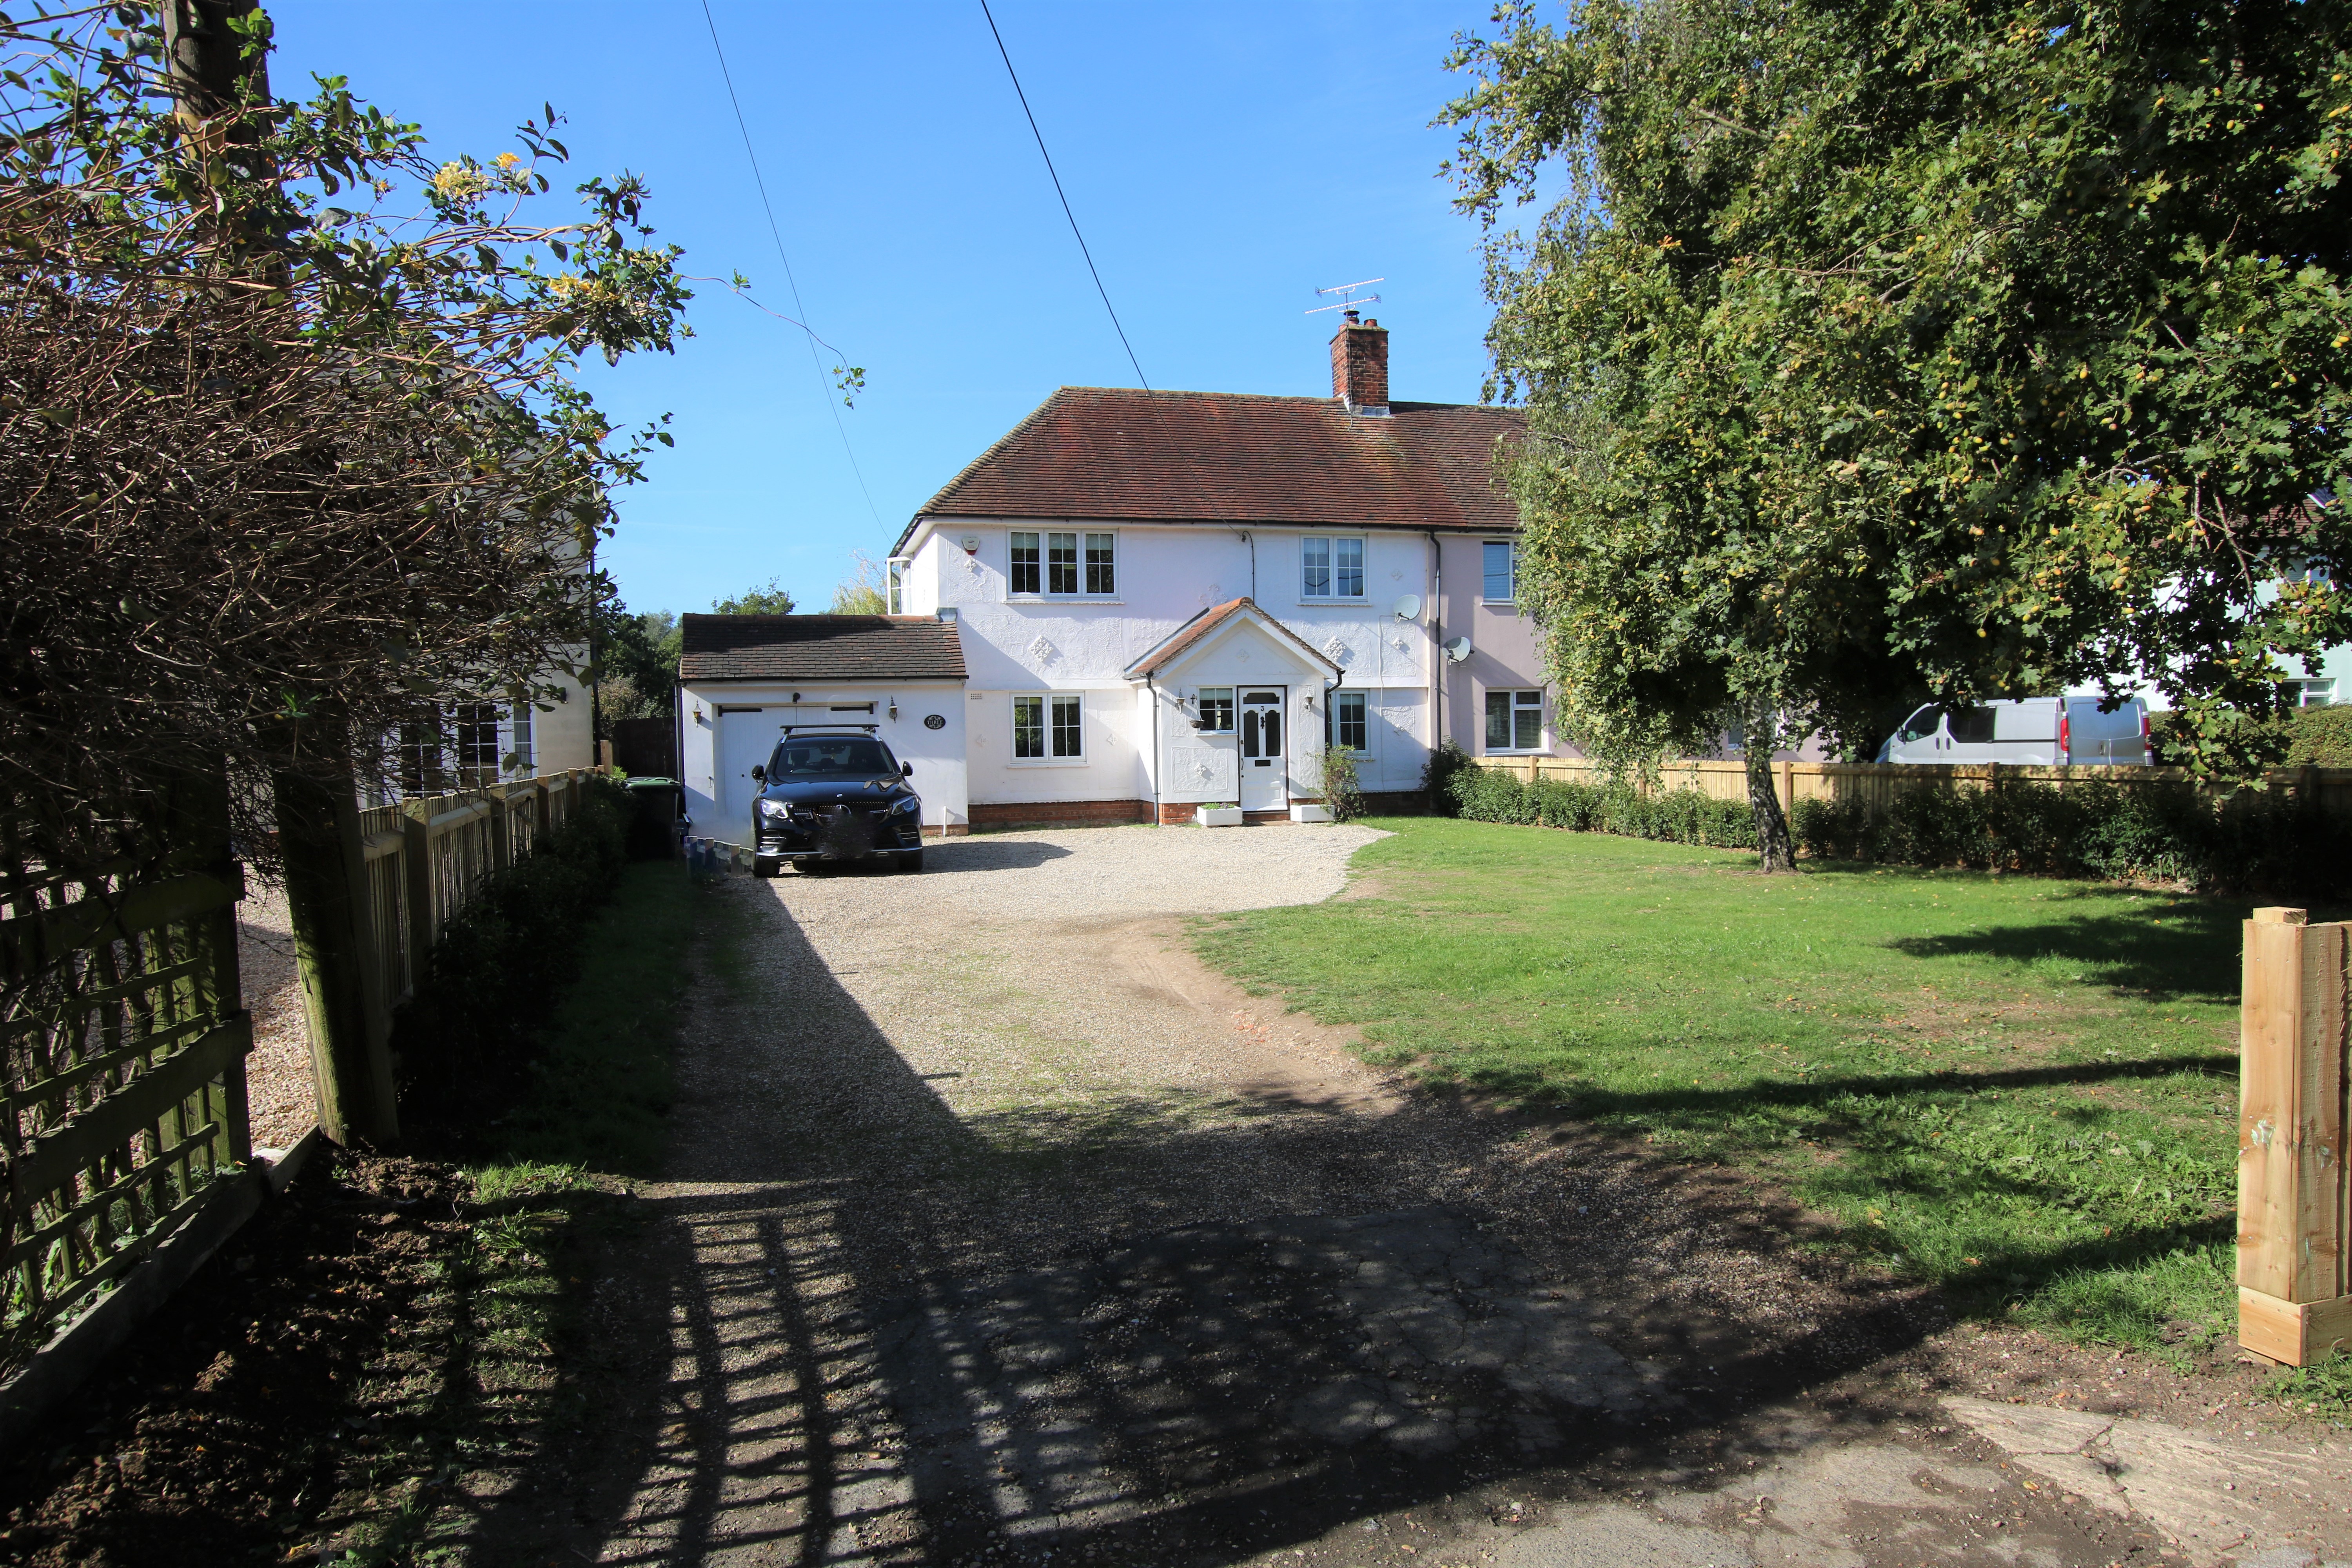 Watchouse Green, Braintree Road, Felsted, Dunmow CM6